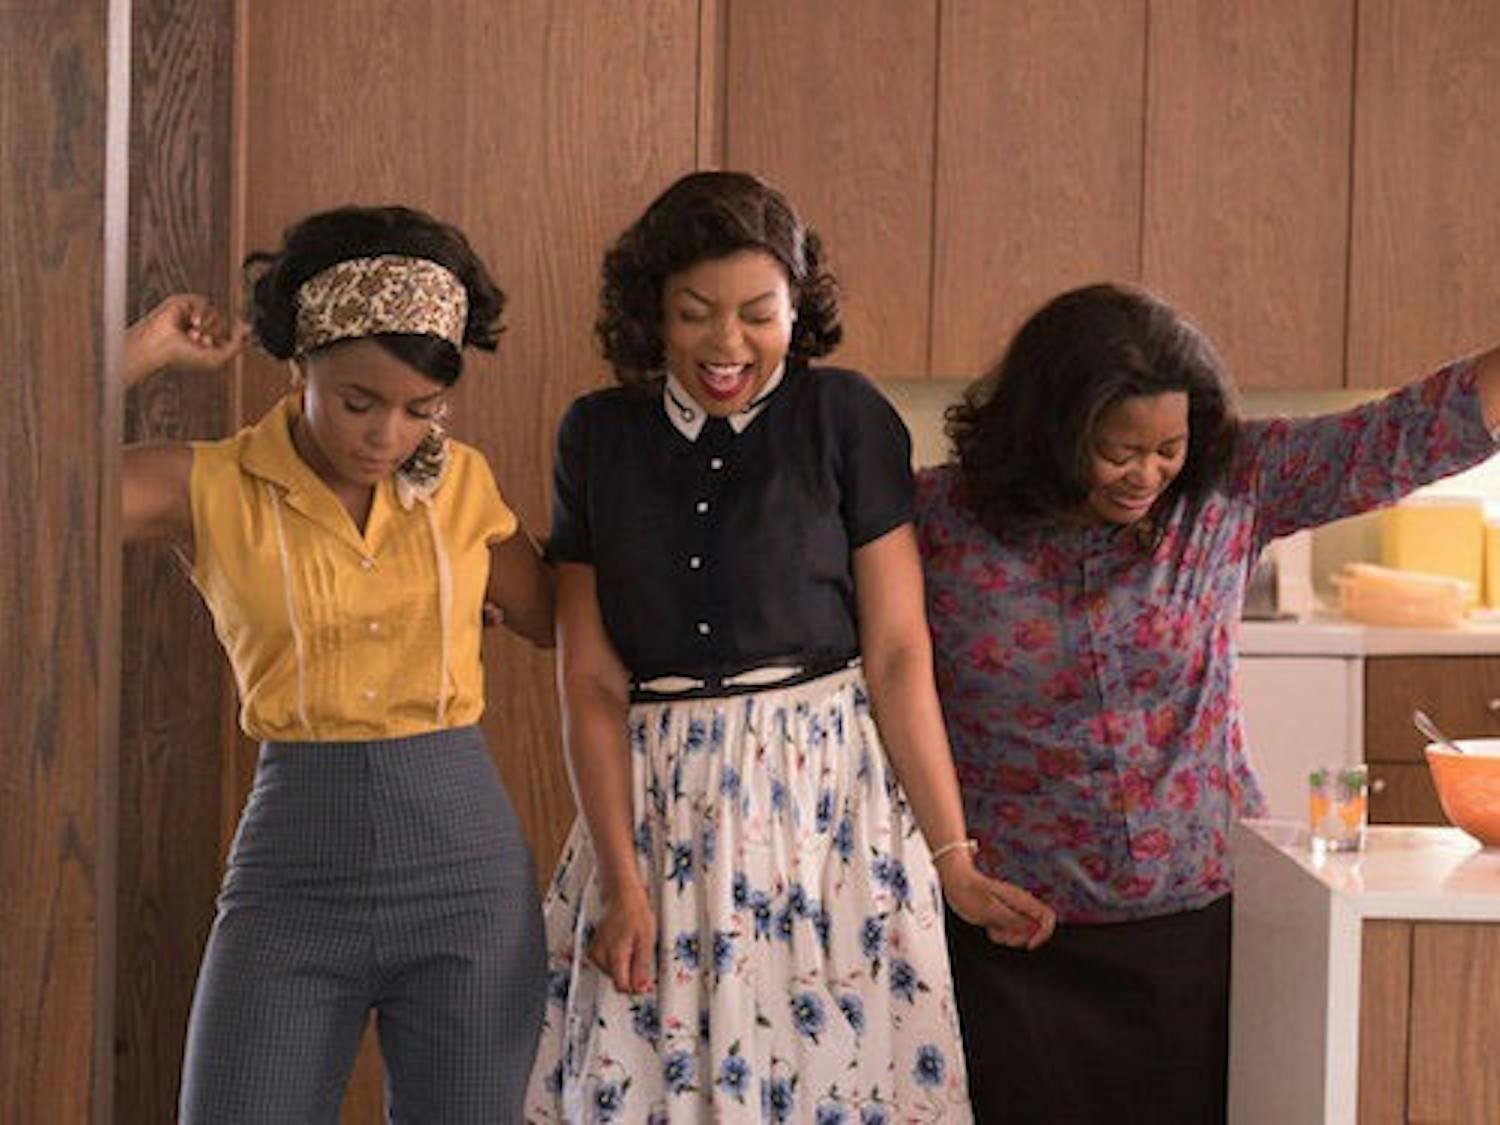 Hidden Figures is the story of Katherine G. Johnson, Dorothy Vaughan and Mary Jackson who are African-American women working at NASA. It was nominated for Best Picture. (20th Century Fox/TNS)